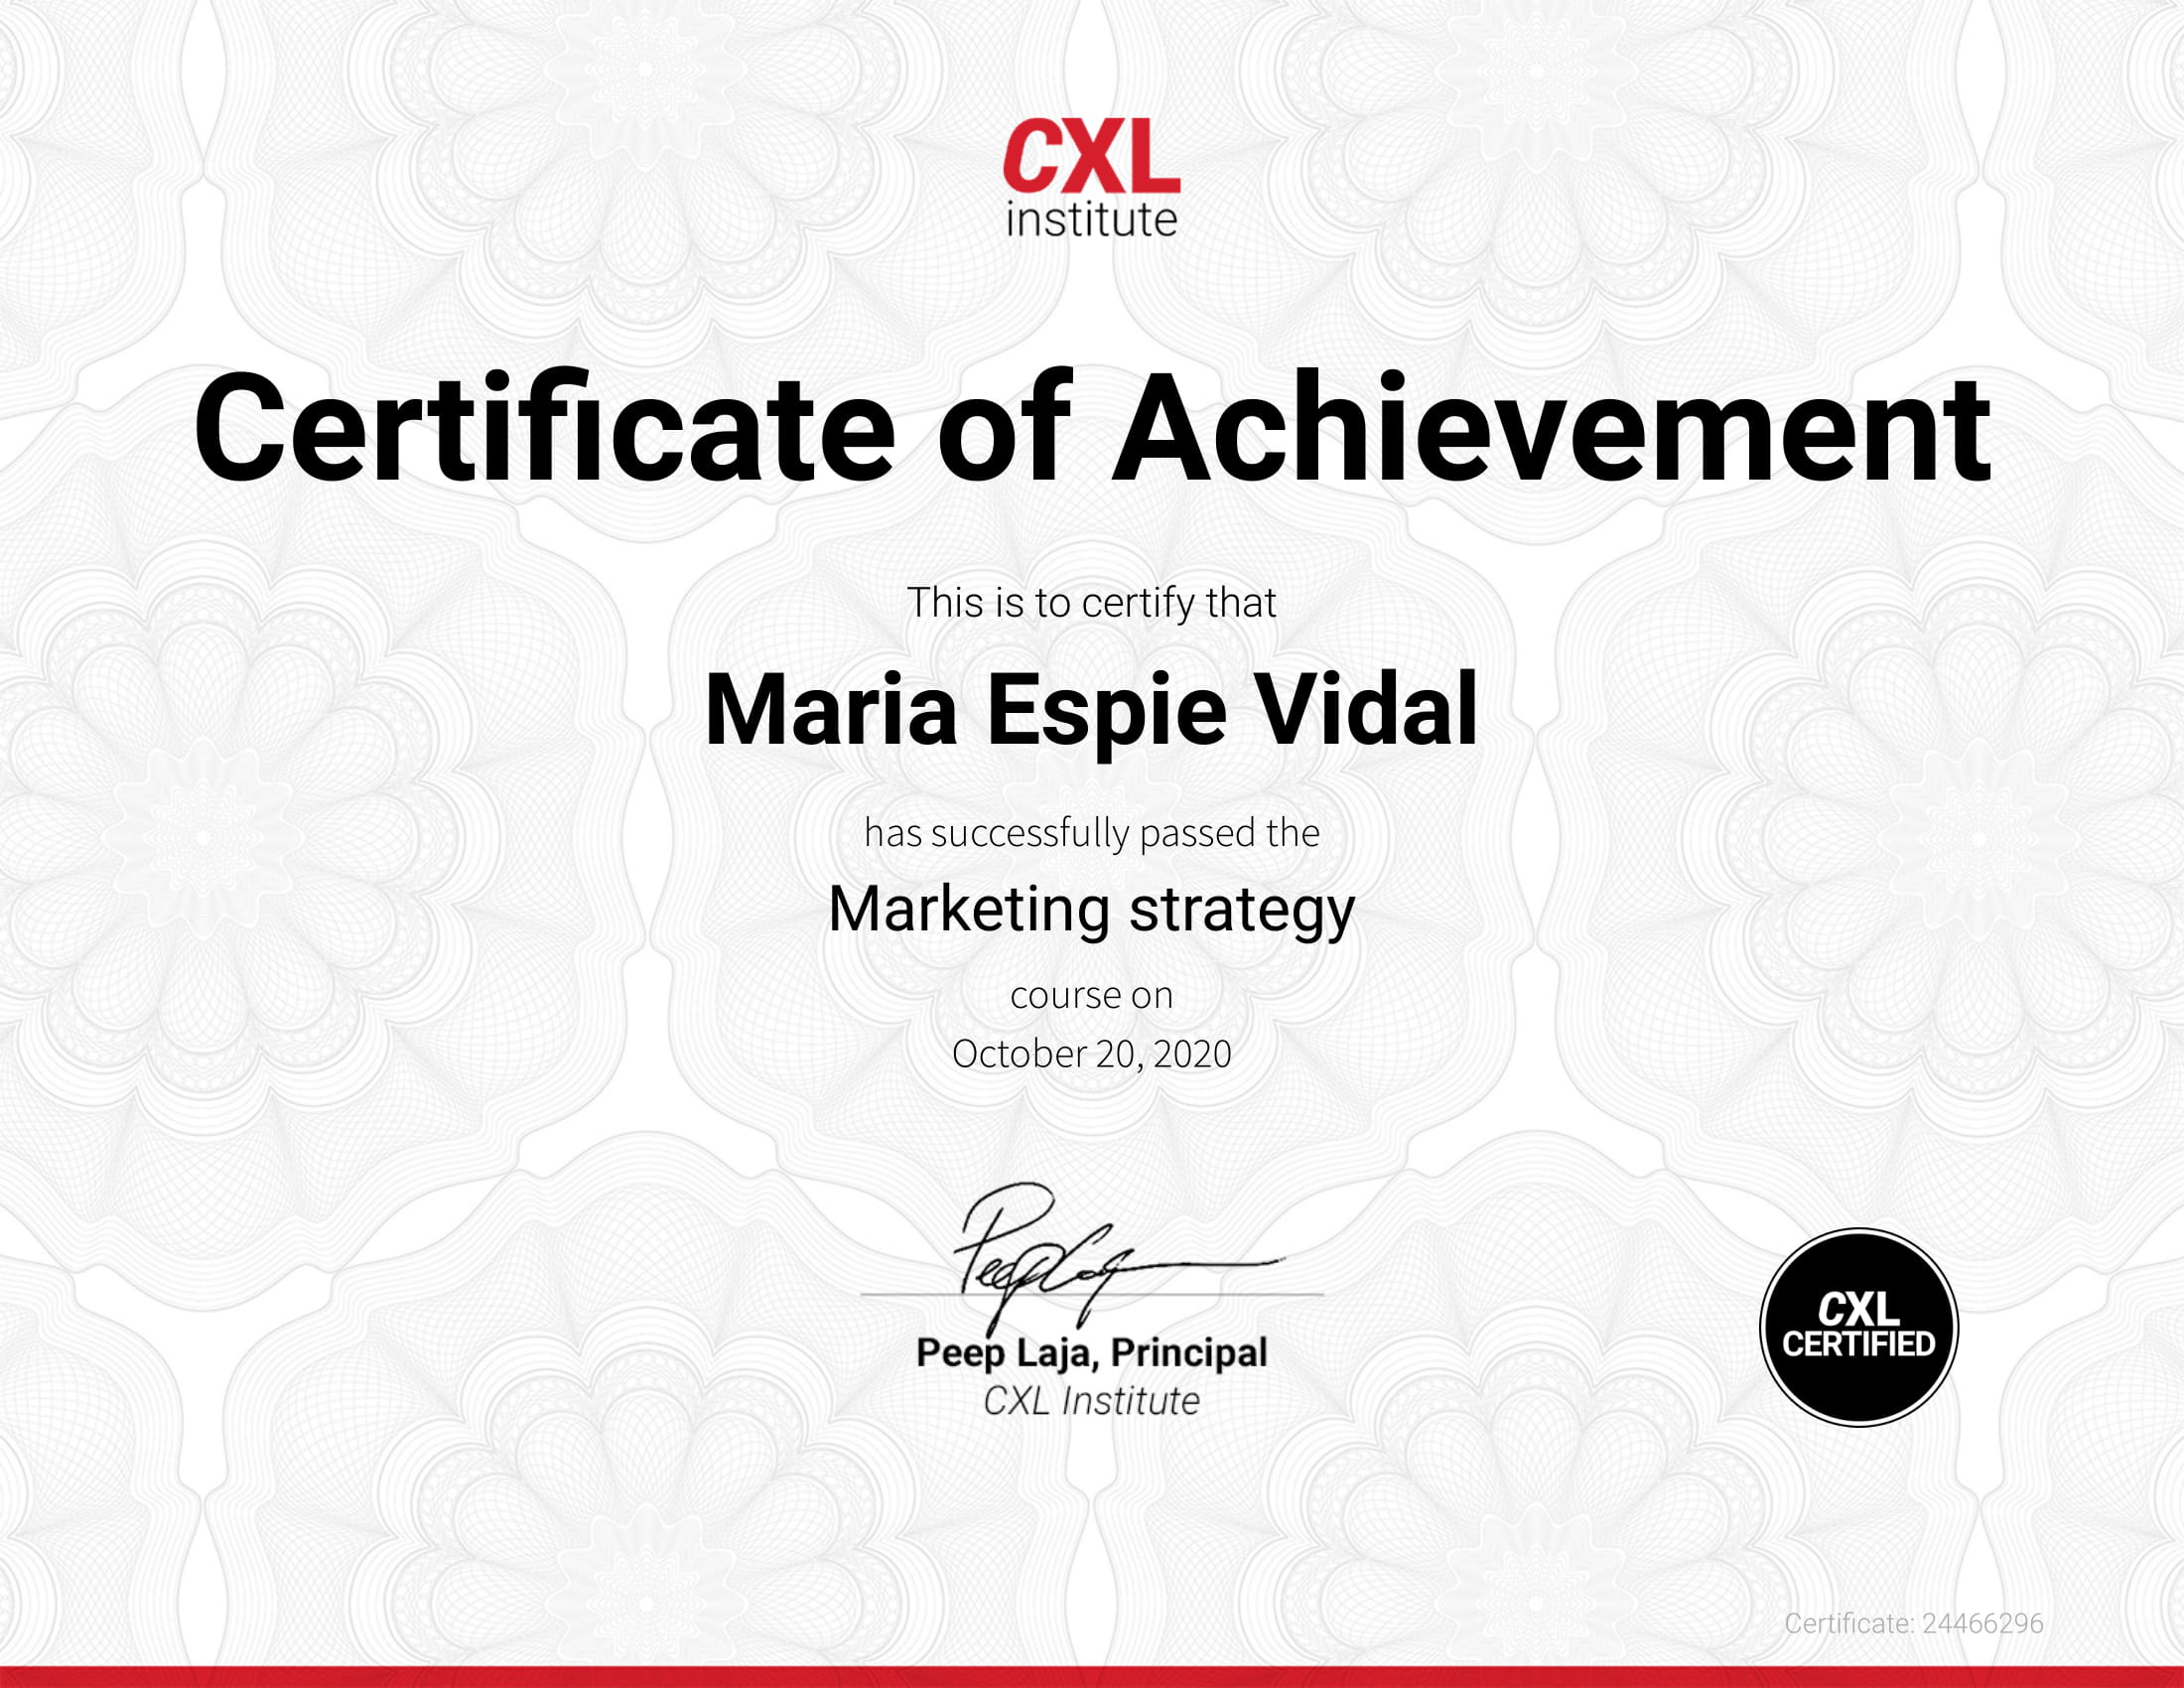 CXL certification for Marketing Strategy